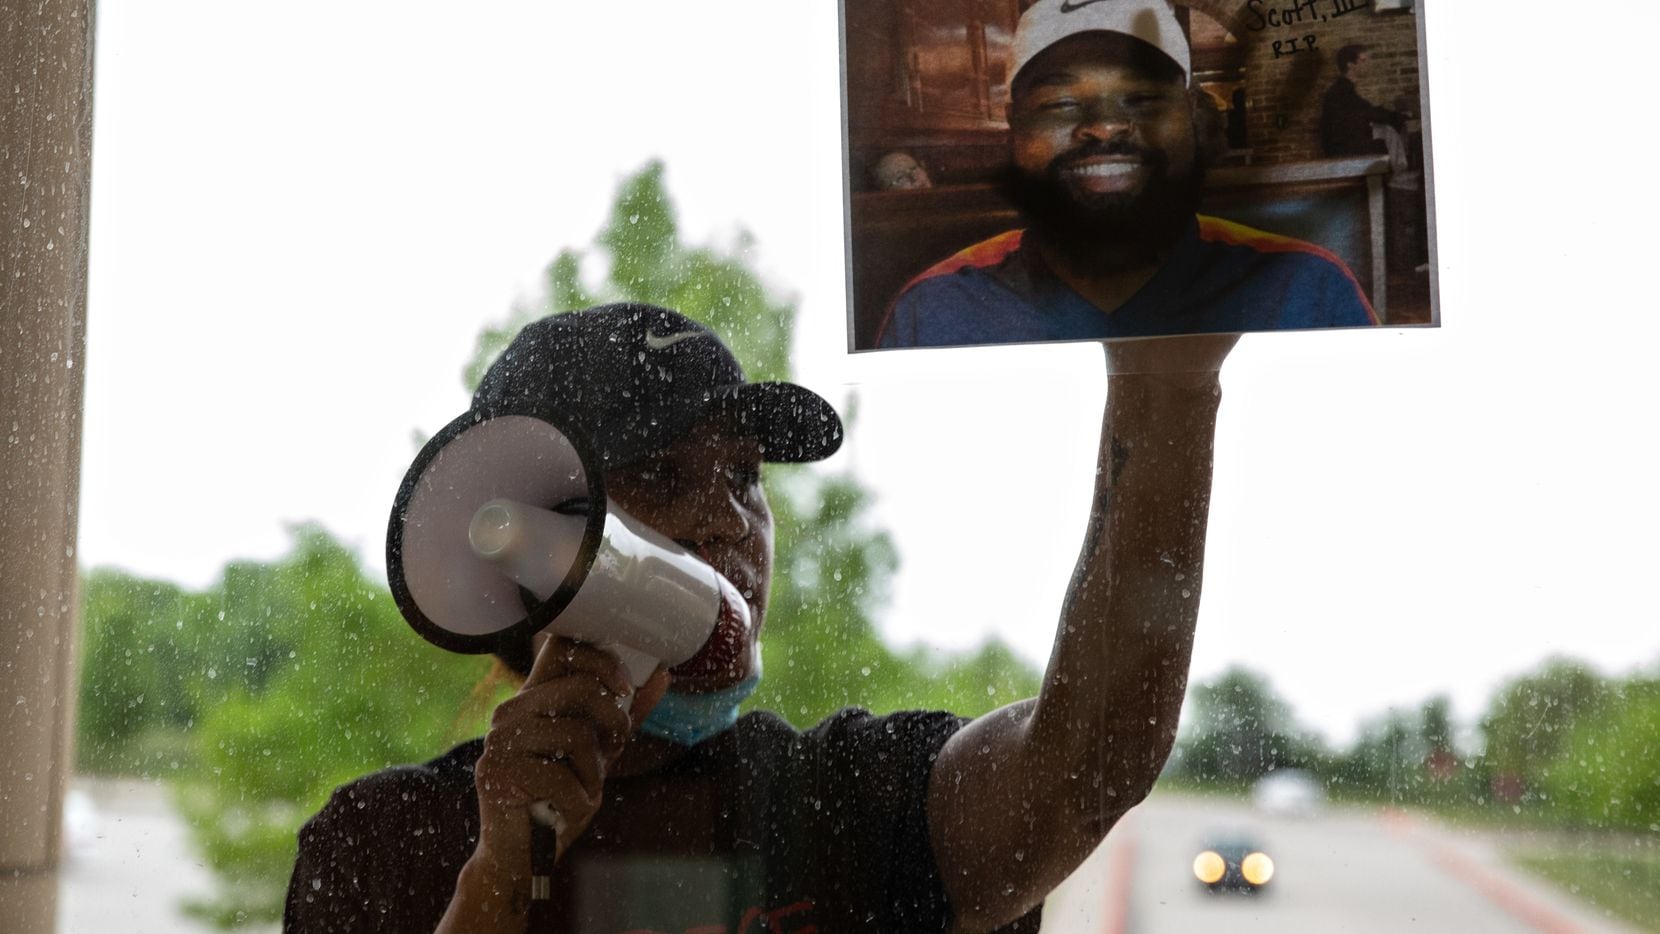 Renee White presses a photo of Marvin Scott III on the windows of the Collin County Courthouse while demanding the officers present arrest the officers involved in Scott's in-custody death after a press conference on April 28, 2021.